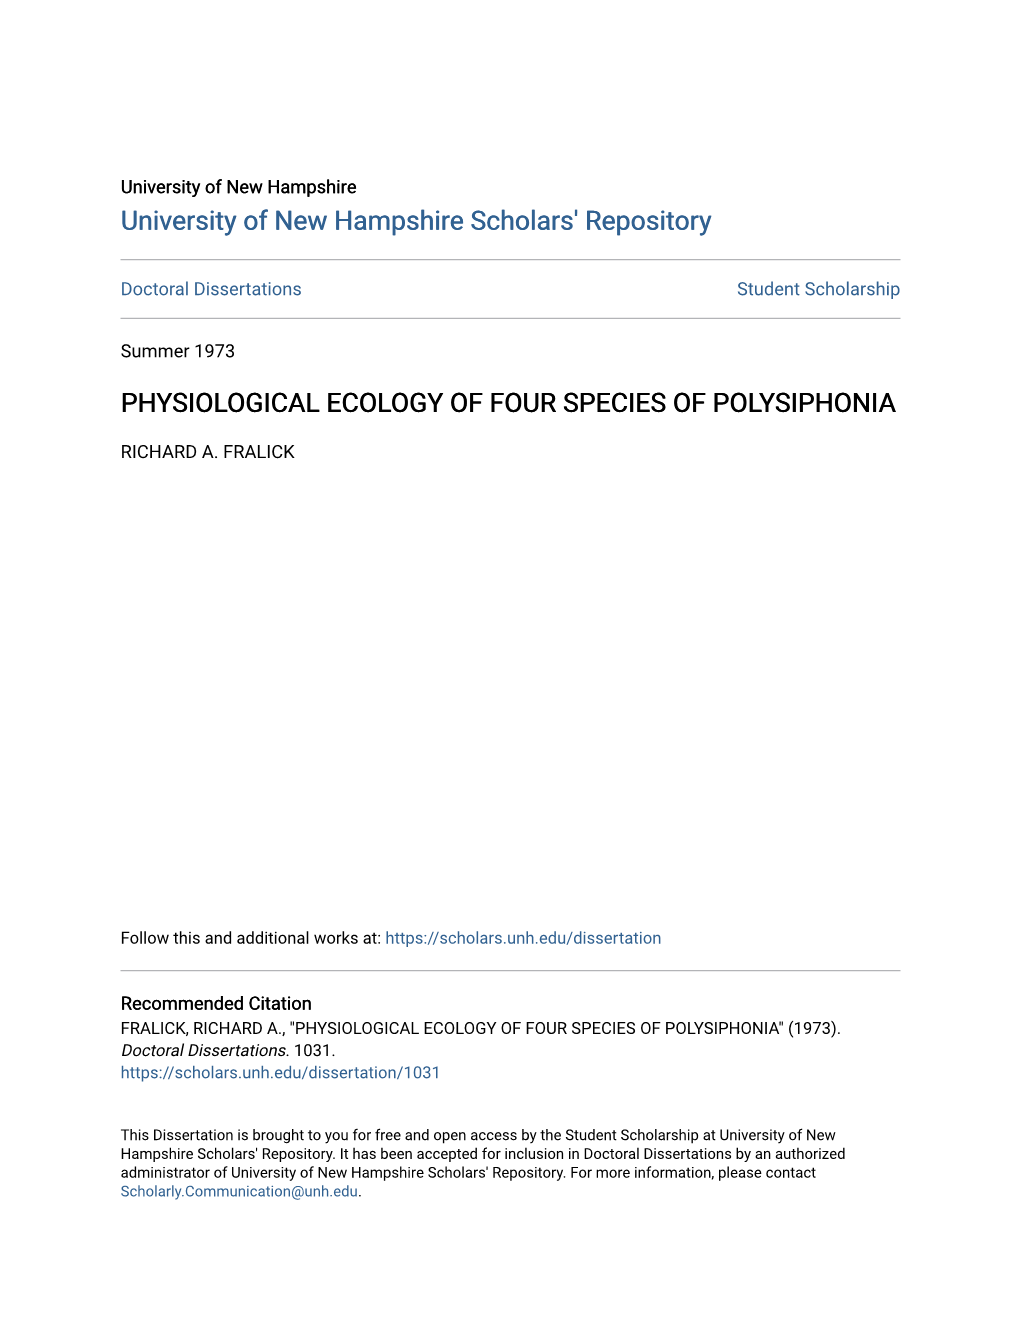 Physiological Ecology of Four Species of Polysiphonia